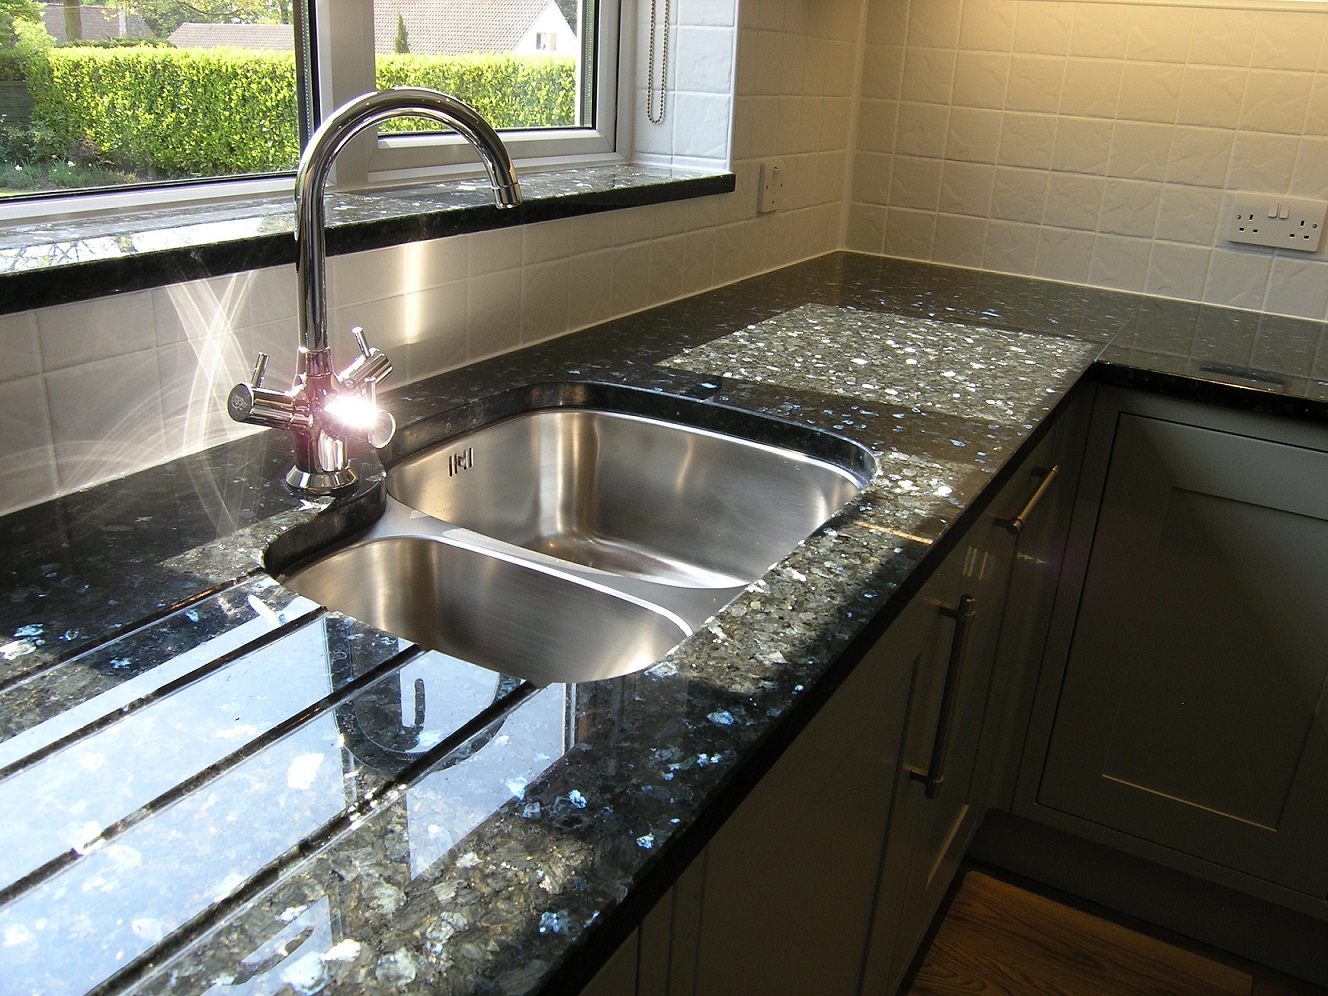 We supply Granite and Quartz Worktops in the staffordshire Area. We supply Granite and Quartz Worktops in the Biddulph Area. We supply Granite and Quartz Worktops in the Burntwood Area. We supply Granite and Quartz Worktops in the Burton-upon-Trent Area. We supply Granite and Quartz Worktops in the Cannock Area. We supply Granite and Quartz Worktops in the Cheadle Area. We supply Granite and Quartz Worktops in the Great-Wyrley Area. We supply Granite and Quartz Worktops in the Hednesford Area. We supply Granite and Quartz Worktops in the Kidsgrove Area. We supply Granite and Quartz Worktops in the Leek Area. We supply Granite and Quartz Worktops in the Lichfield Area. We supply Granite and Quartz Worktops in the Newcastle-under-Lyme Area. We supply Granite and Quartz Worktops in the Perton Area. We supply Granite and Quartz Worktops in the Rugeley Area. We supply Granite and Quartz Worktops in the Stafford Area. We supply Granite and Quartz Worktops in the Stoke-on-Trent Area. We supply Granite and Quartz Worktops in the Stone Area. We supply Granite and Quartz Worktops in the Tamworth Area. We supply Granite and Quartz Worktops in the Uttoxeter Area. We supply Granite and Quartz Worktops in the Wimblebury Area. We supply Granite and Quartz Worktops in the Wombourne Area.